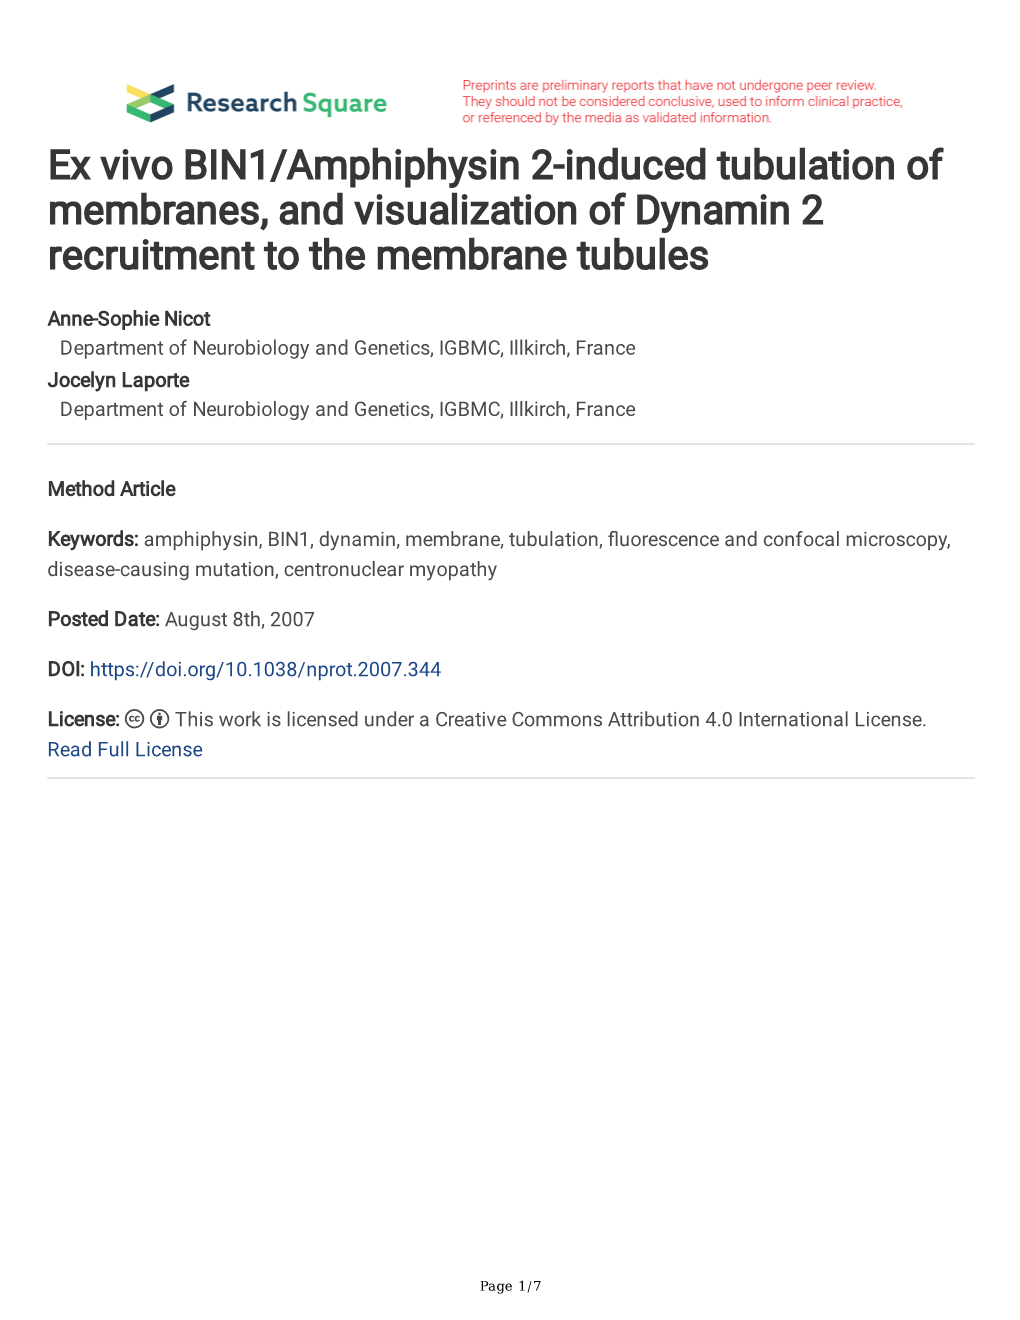 Ex Vivo BIN1/Amphiphysin 2-Induced Tubulation of Membranes, and Visualization of Dynamin 2 Recruitment to the Membrane Tubules